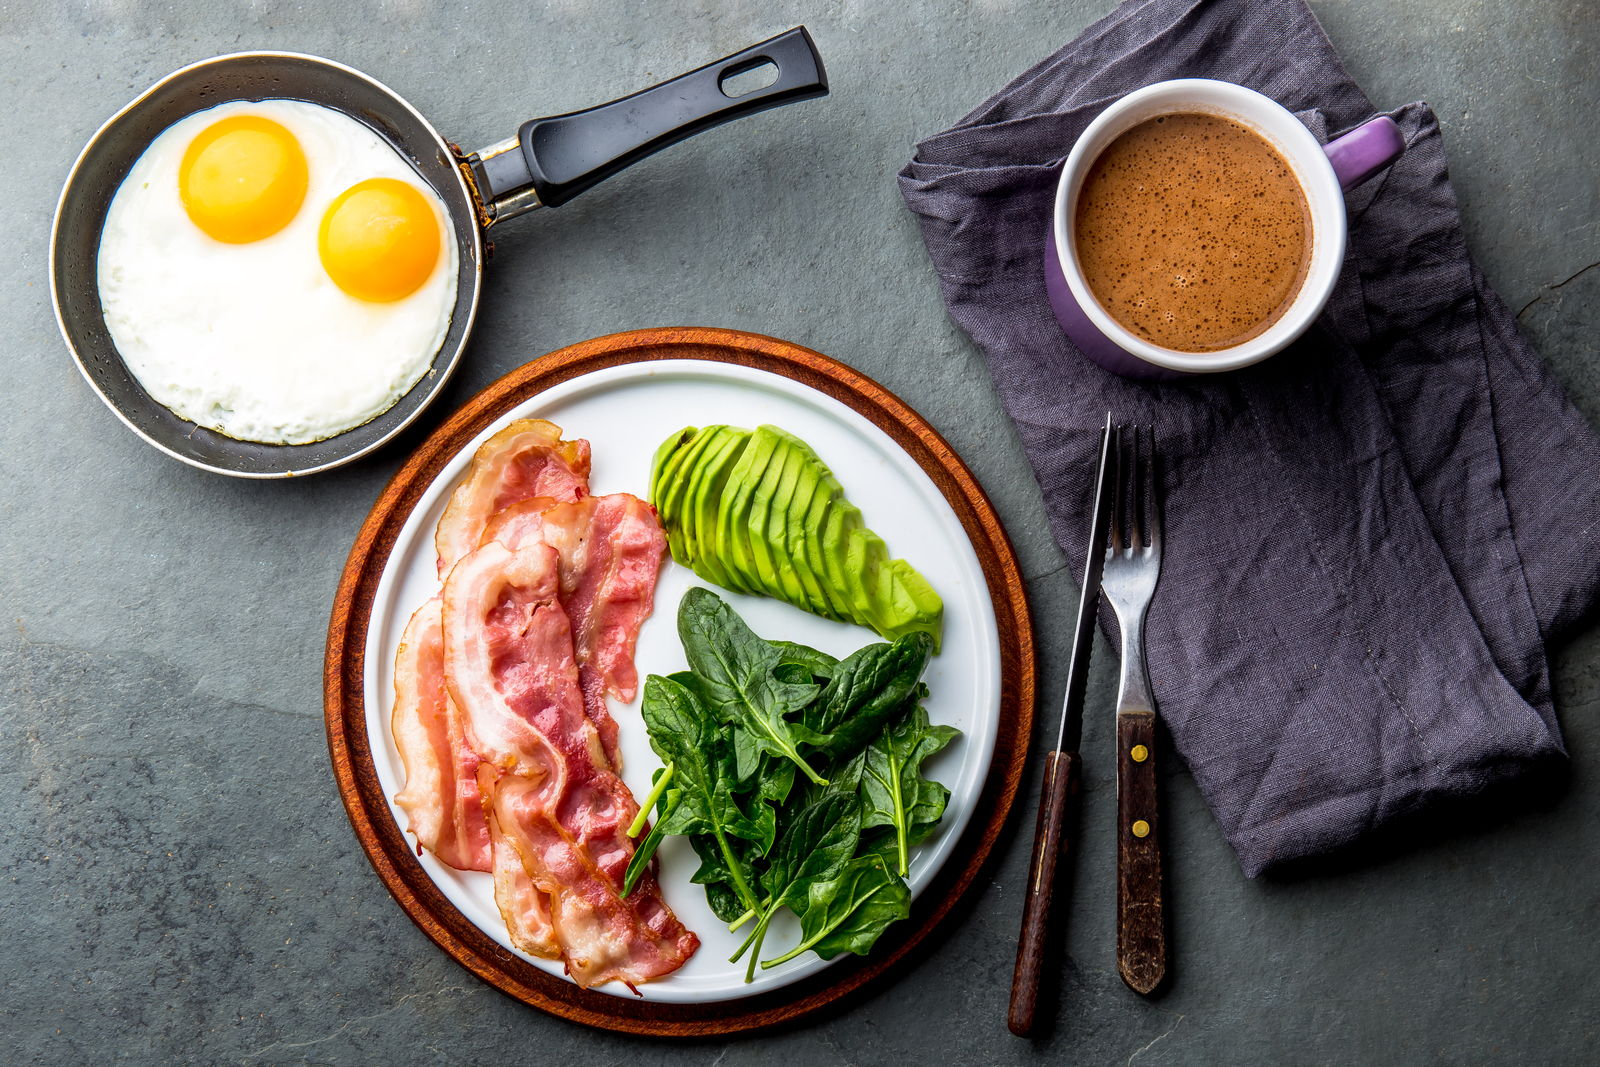 Example of a ketogenic breakfast